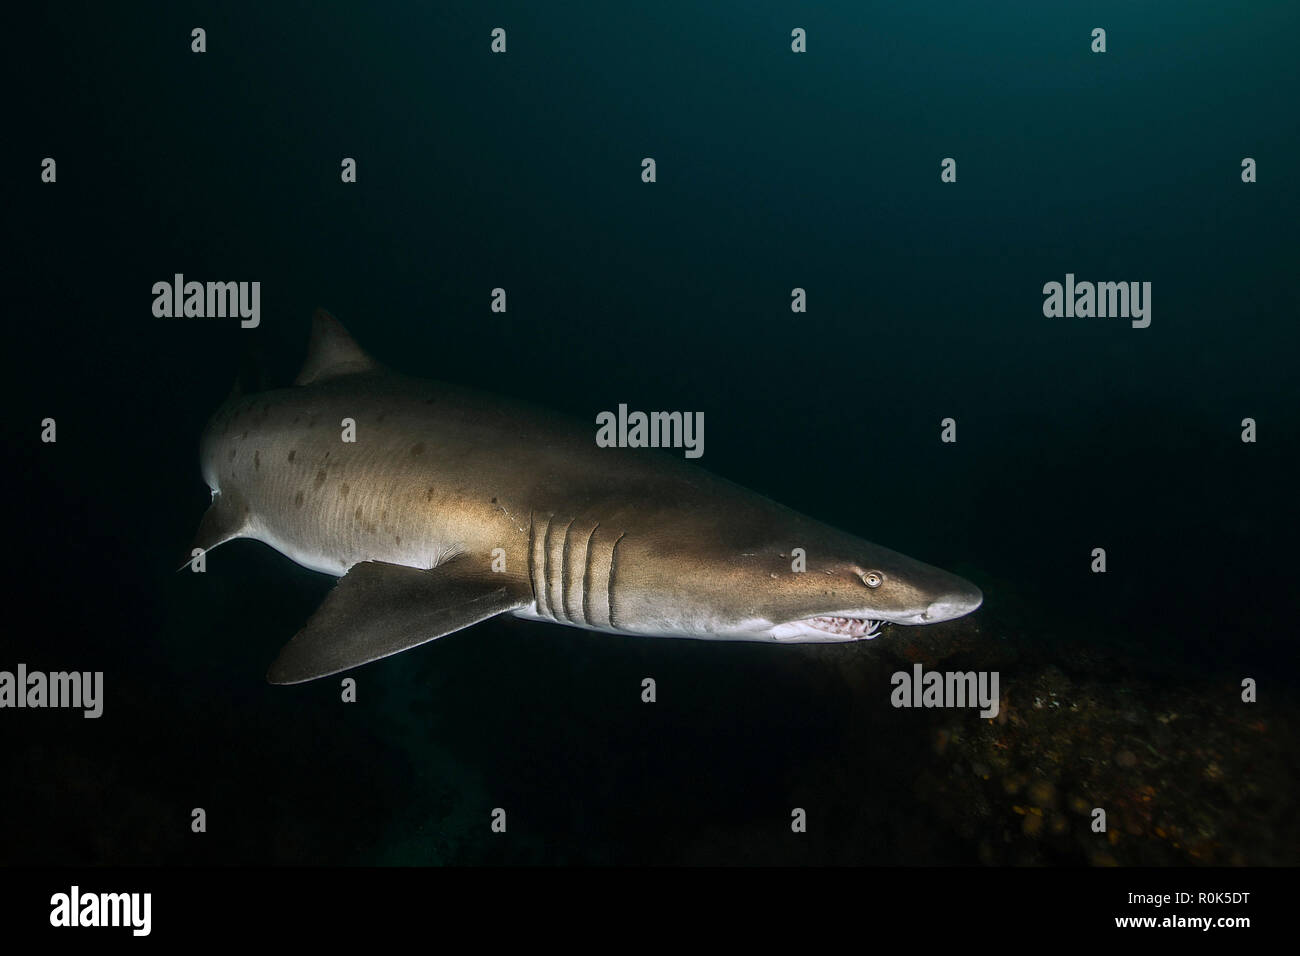 A ragged-tooth shark hunting for food in the waters of South Africa. Stock Photo